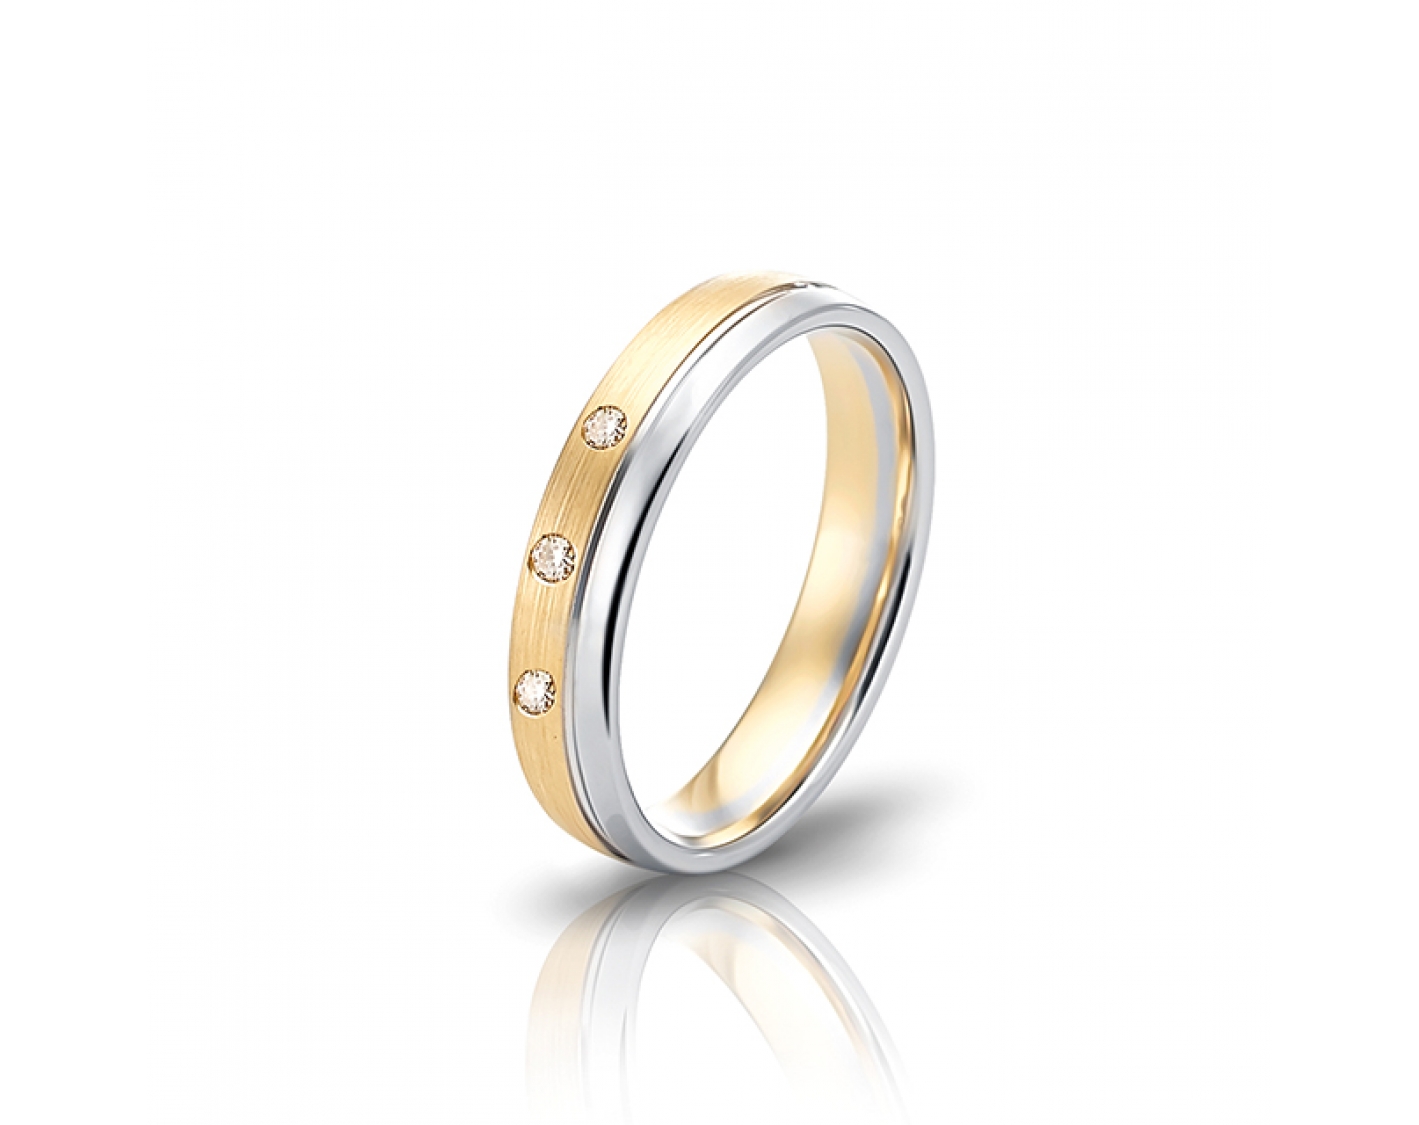 dual-tone 4mm two-toned* wedding band with diamonds Photos & images